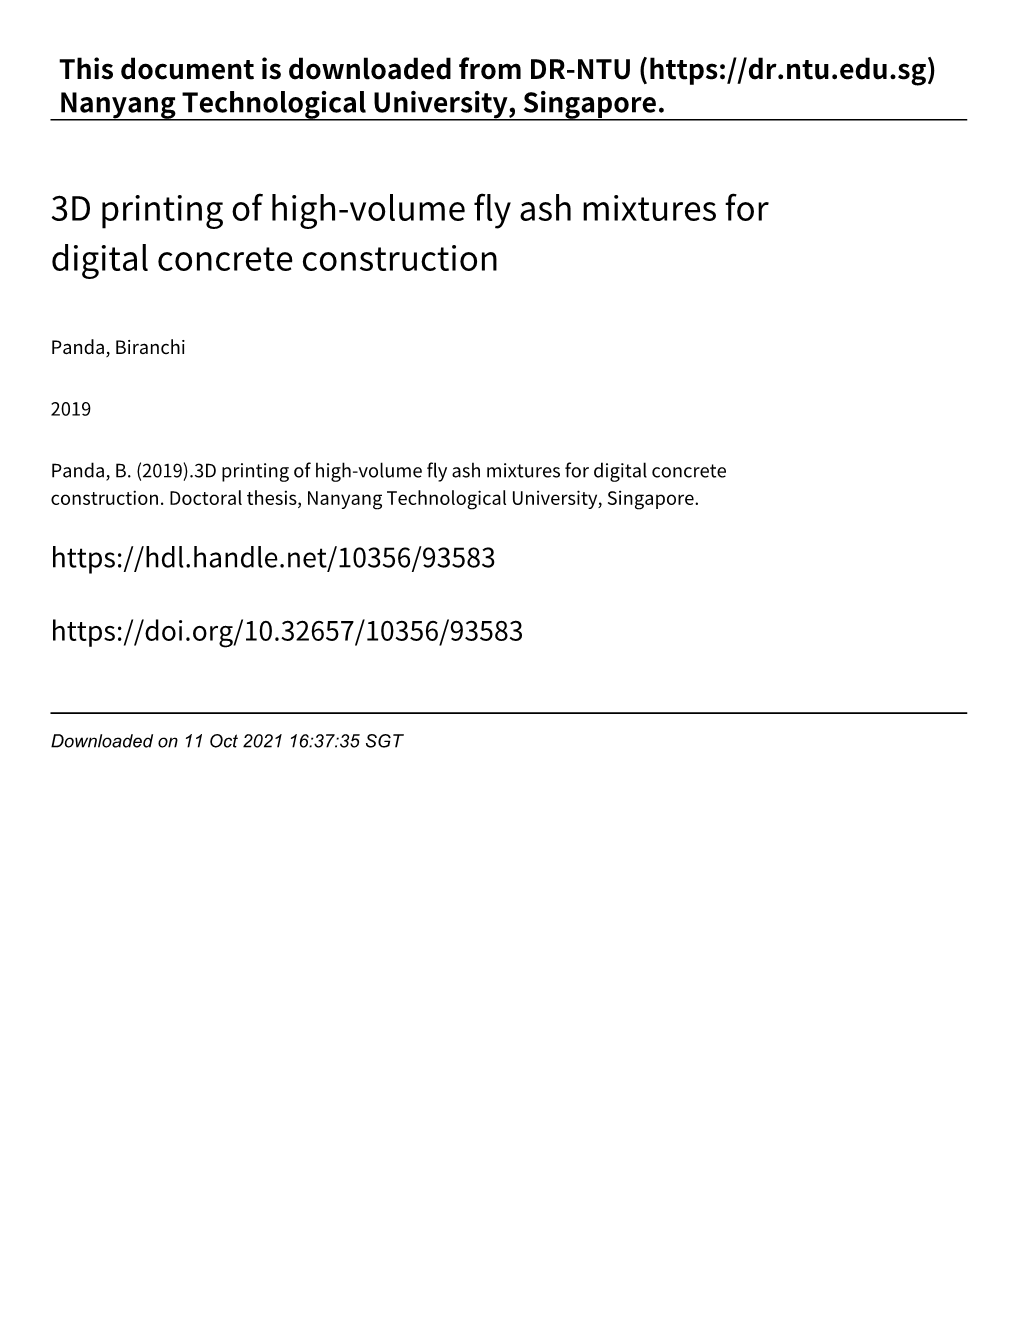 3D Printing of High‑Volume Fly Ash Mixtures for Digital Concrete Construction